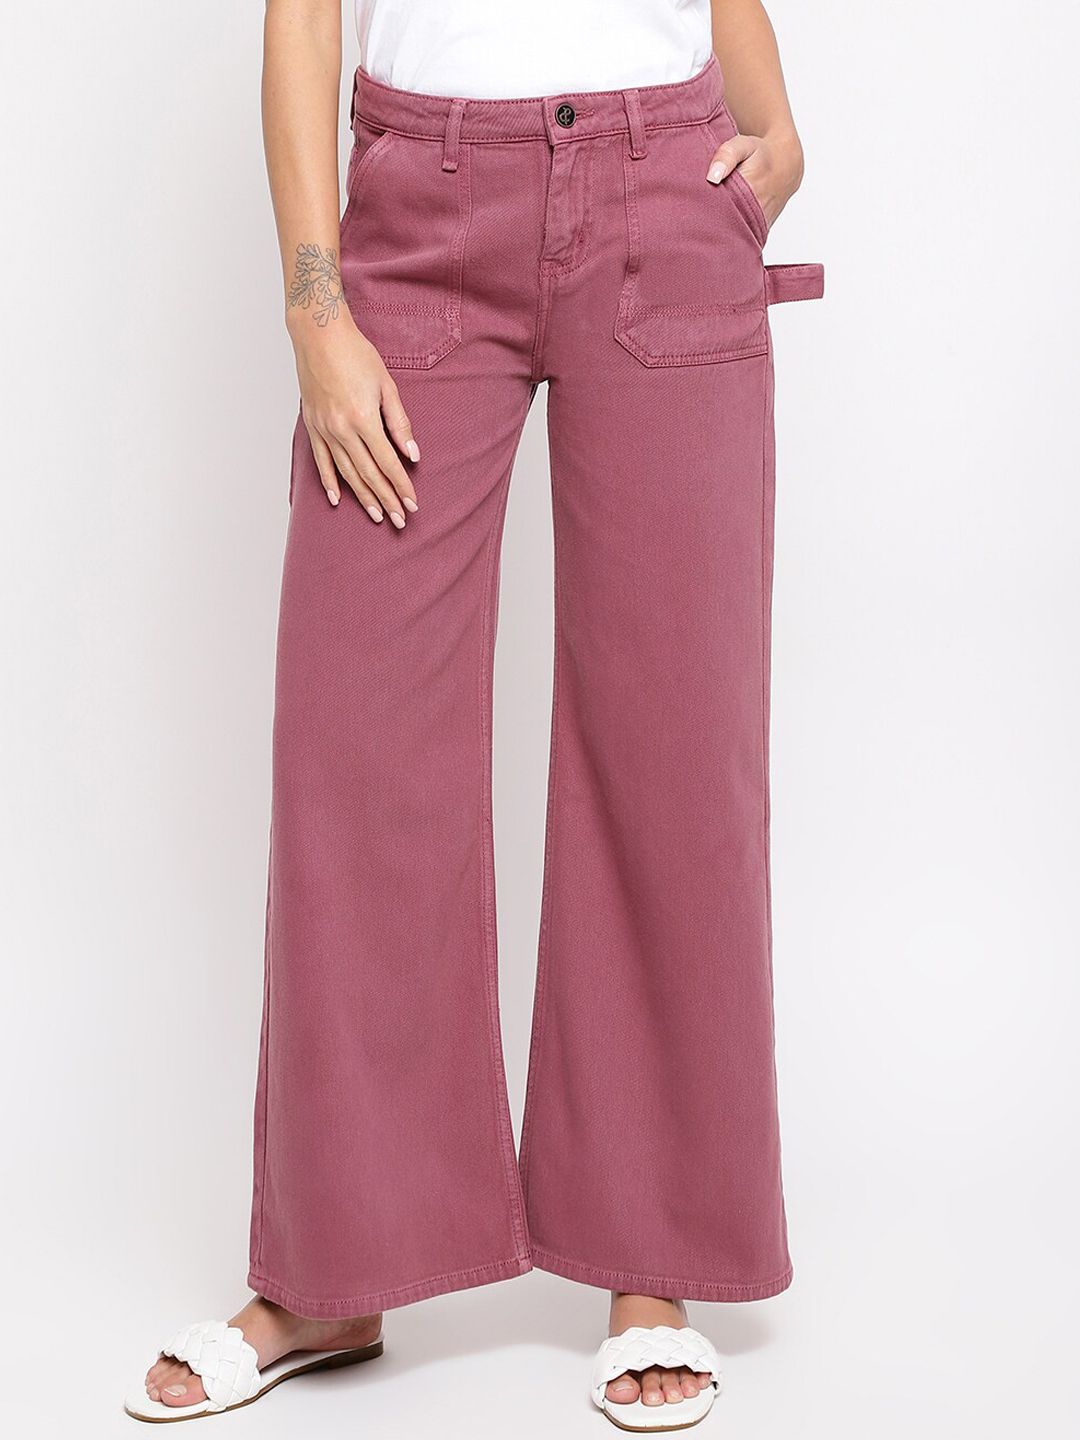 TALES & STORIES Women Maroon Wide Leg Stretchable Jeans Price in India